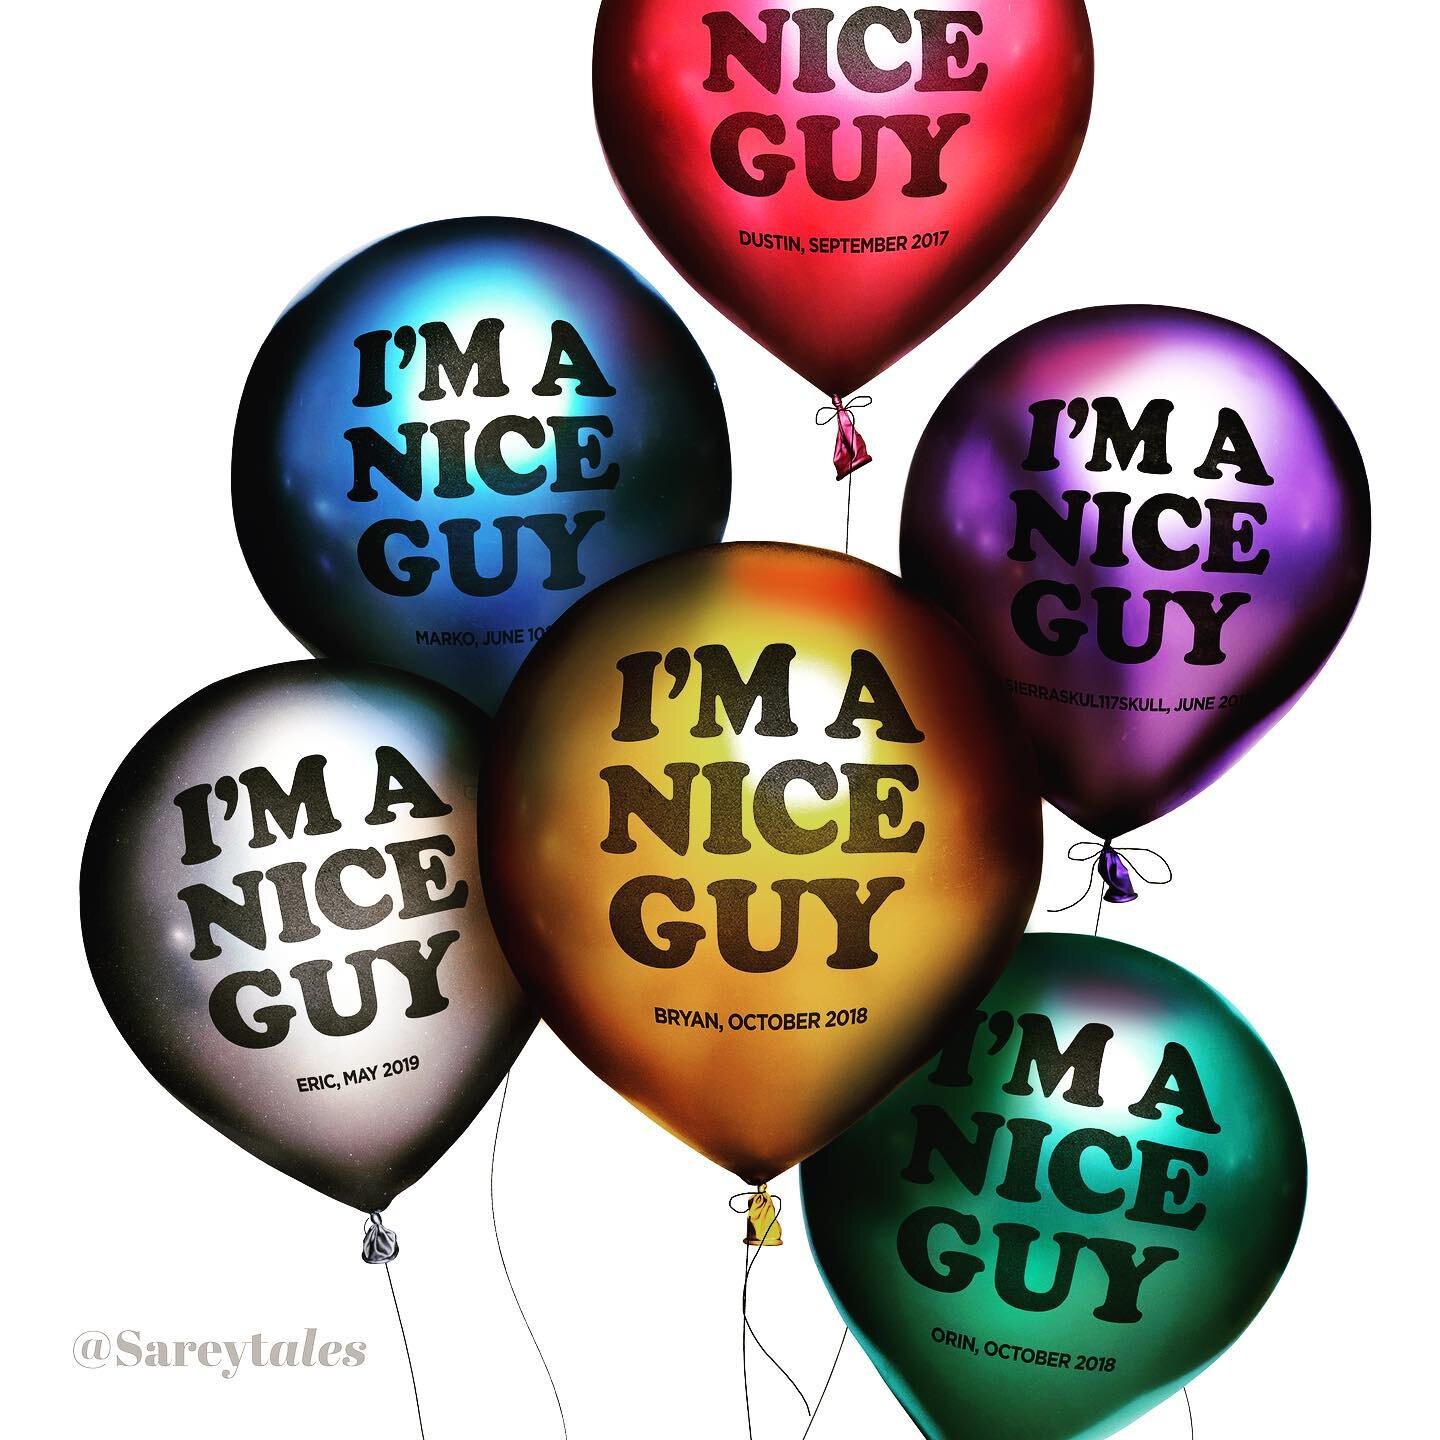 #tbt to one of my faves from 2019: &ldquo;Hot Air 3: The Nice Guy Parade&rdquo; 🎈🎈🎈💨 How many times has a self-proclaimed &ldquo;nice guy&rdquo; popped like a bullshit balloon after not getting his way? 🙋🏻&zwj;♀️🙋🏼&zwj;♀️🙋🏽&zwj;♀️🙋🏾&zwj;♀